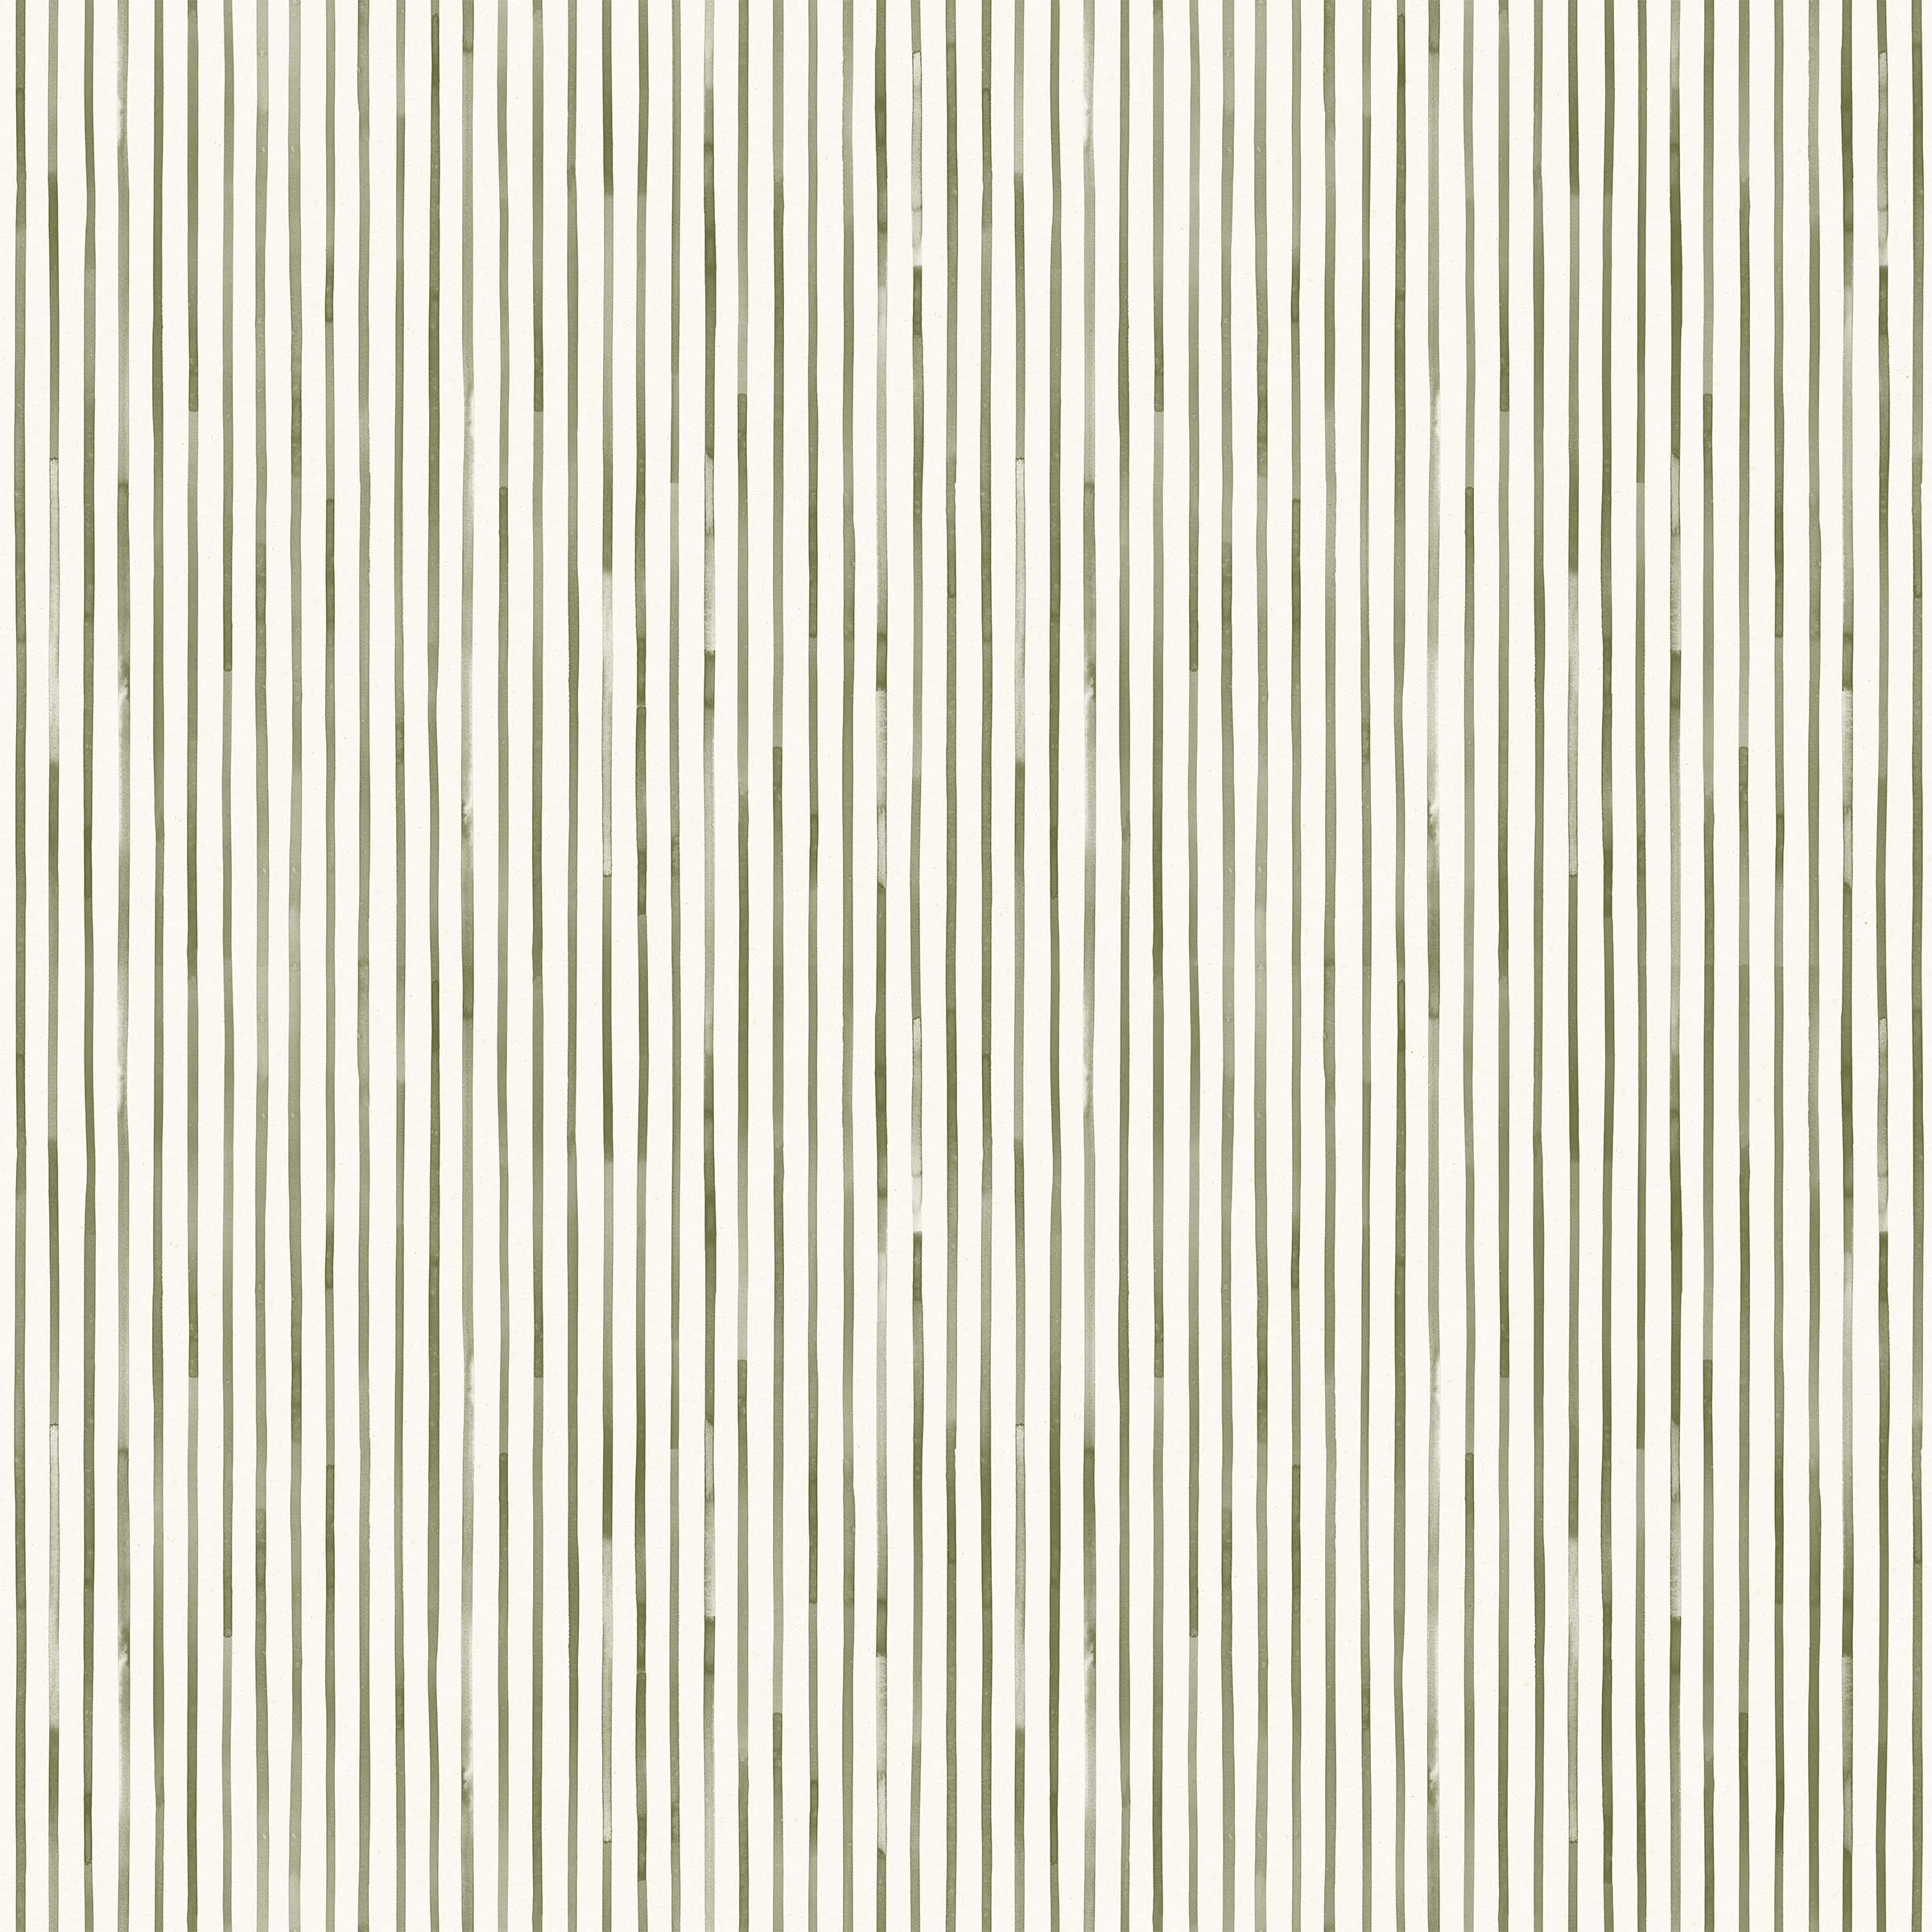 Detail of wallpaper in a painterly stripe pattern in sage on a white field.